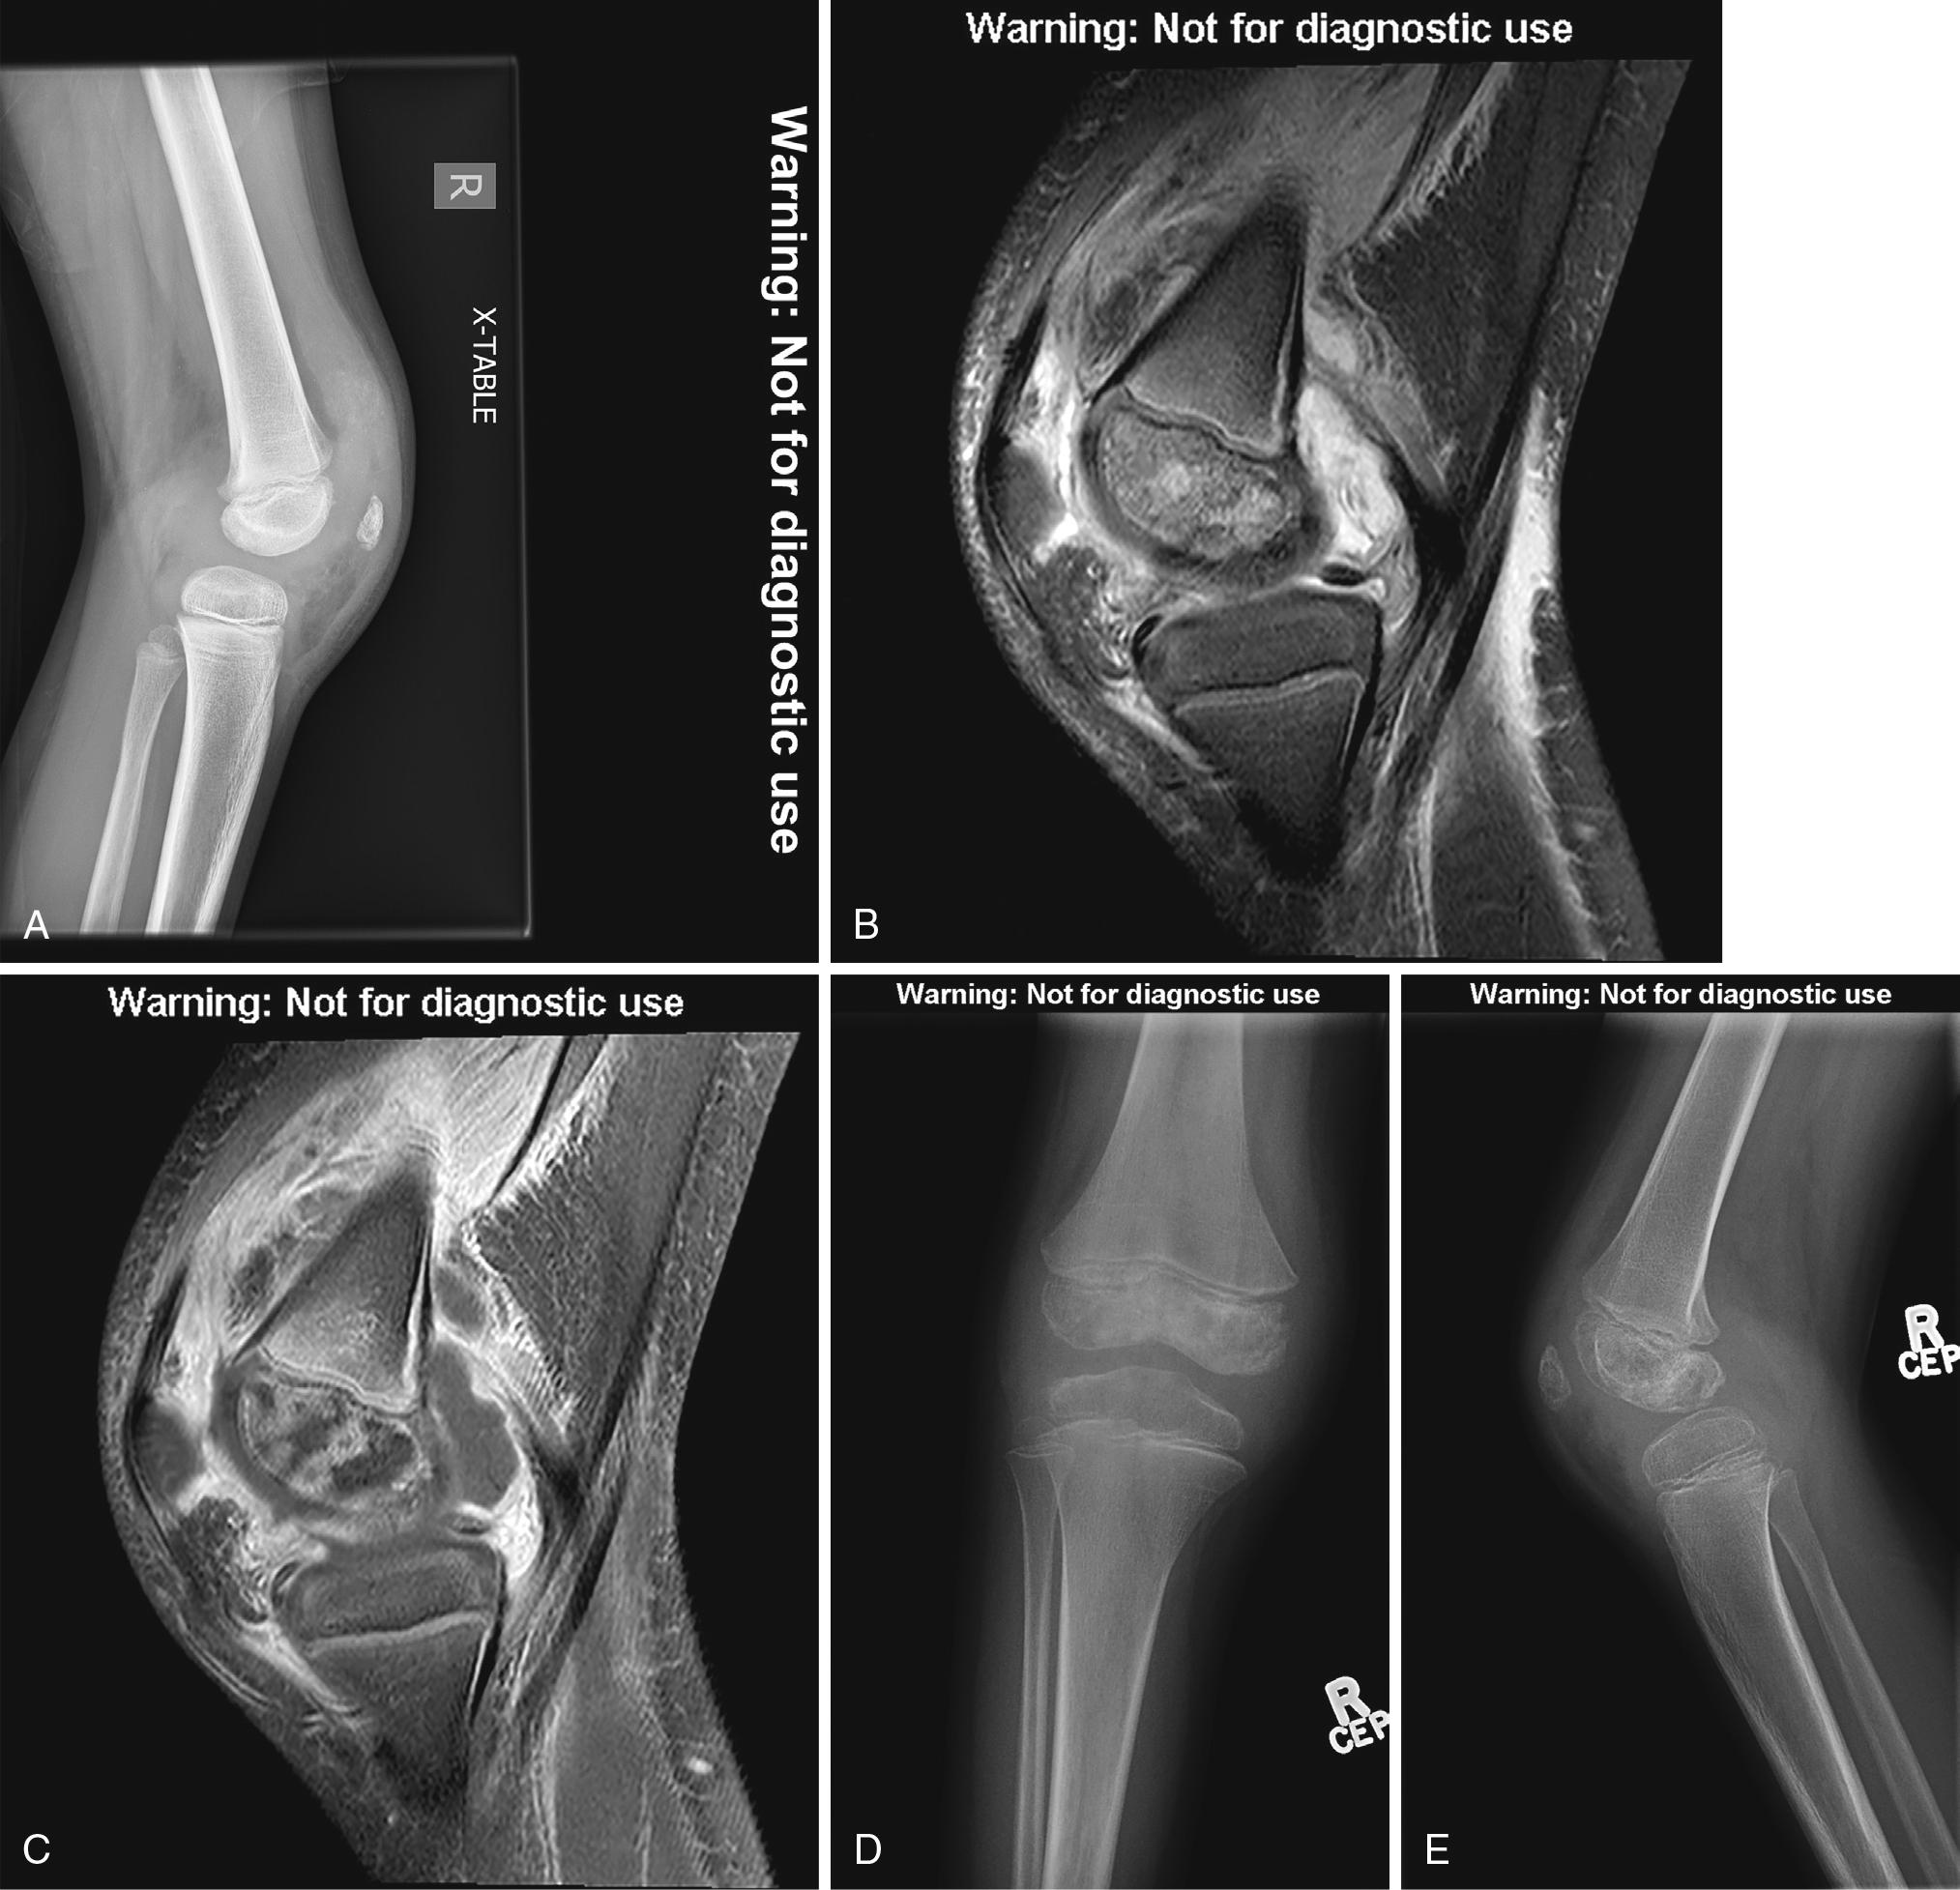 Fig. 44.1, A, Lateral view of the right knee in a 6-year-old boy with pain and fever demonstrates a large joint effusion. Magnetic resonance imaging (MRI) obtained a few days later confirms a large joint effusion with diffuse synovial thickening on the sagittal short tau inversion recovery (STIR) image ( B ). The sagittal T1 fat-saturated image post-gadolinium ( C ) shows avid enhancement of the thickened synovium with nonenhancing pockets of fluid. There is also abnormal enhancement of the distal femoral epiphysis in keeping with osteomyelitis with bone abscess ( arrow ). Anteroposterior (AP) ( D ) and lateral ( E ) radiographs of the right knee after treatment show resolution of the joint effusion with patchy sclerosis in the distal femoral epiphysis indicating ongoing healing from osteomyelitis.